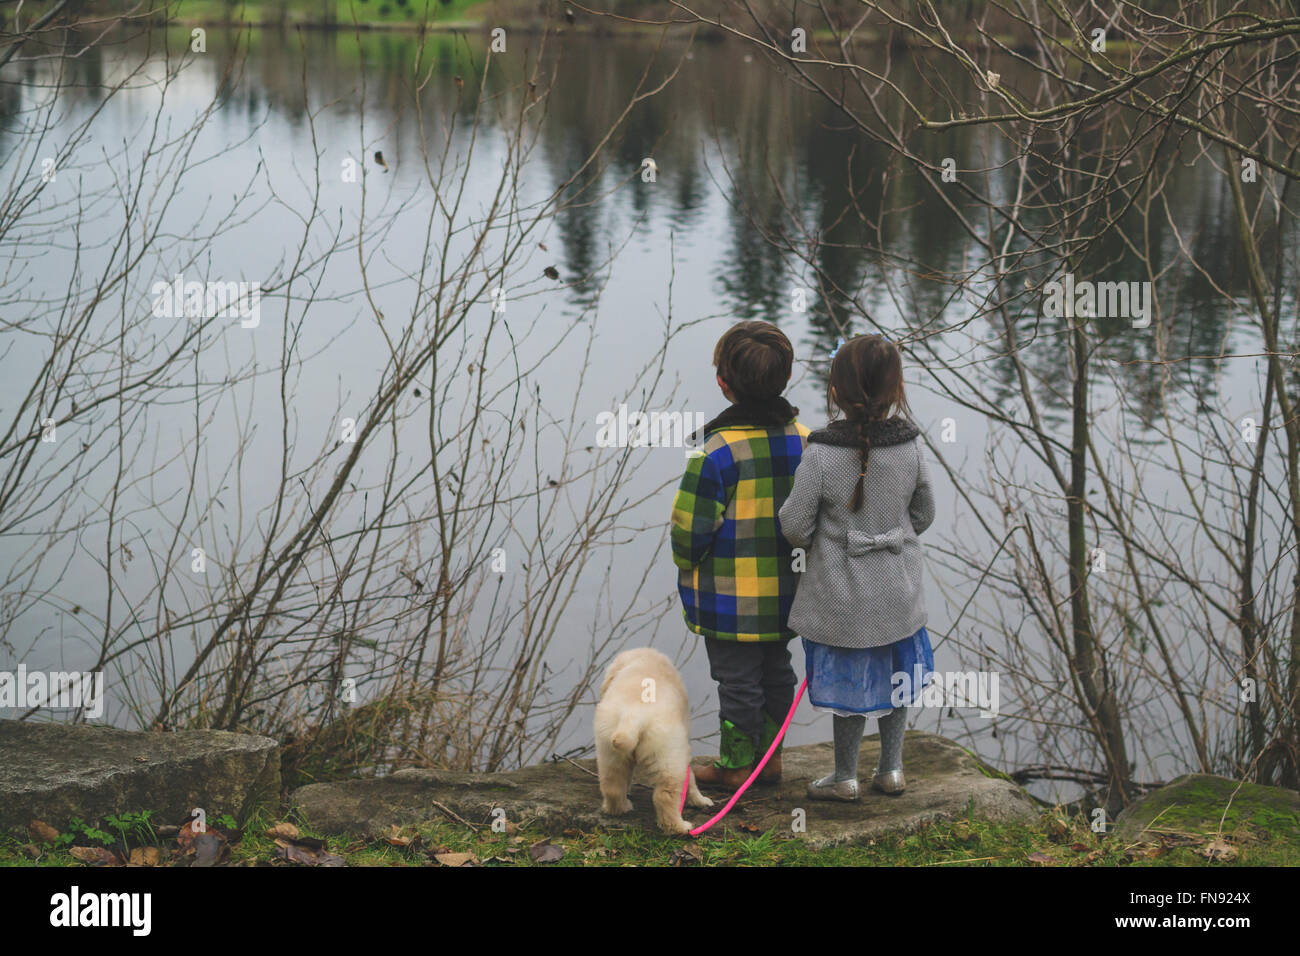 Boy, girl and golden retriever puppy dog standing at water's edge Stock Photo